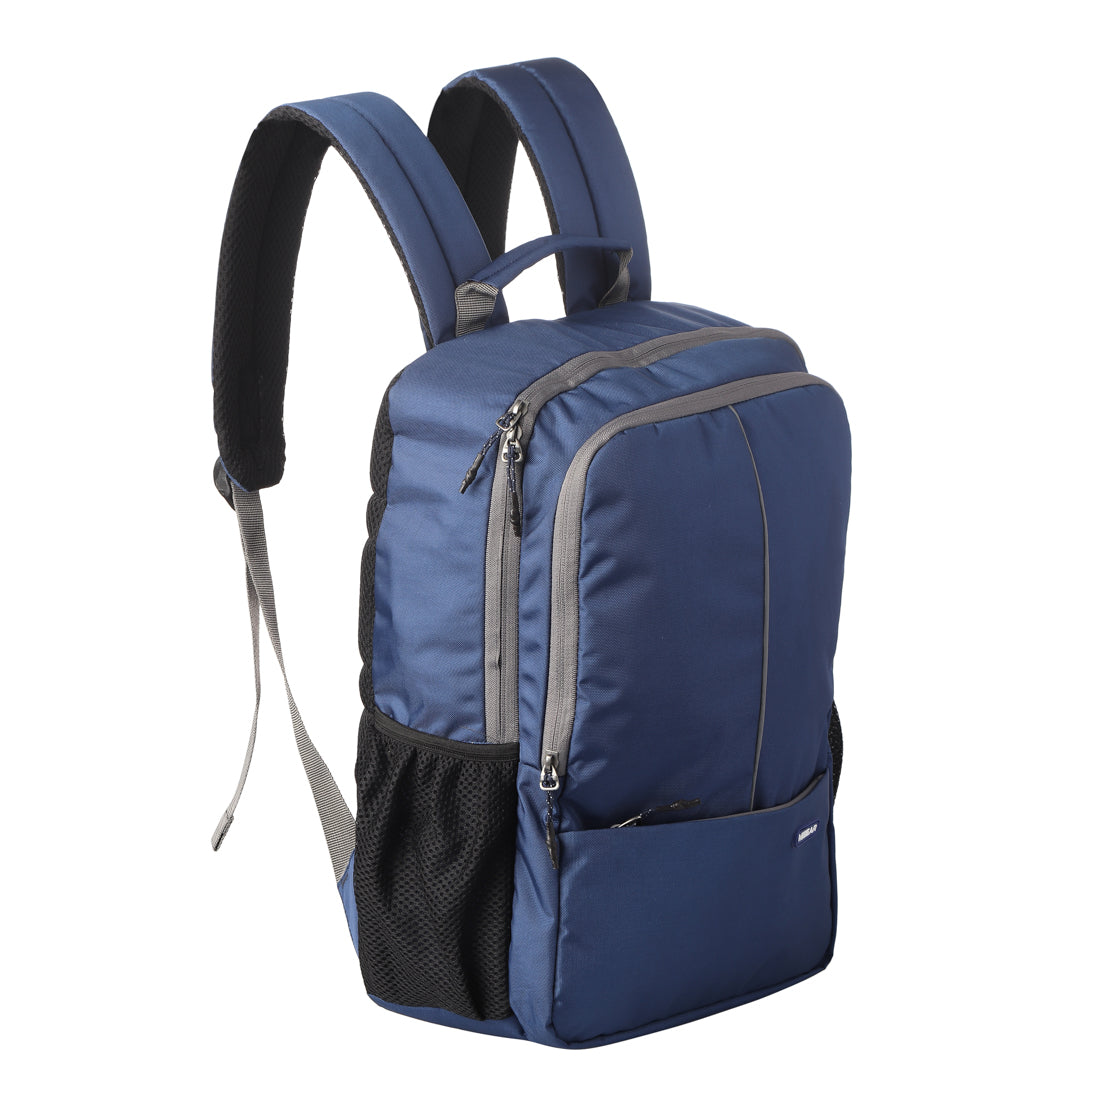 The Calibre Backpack